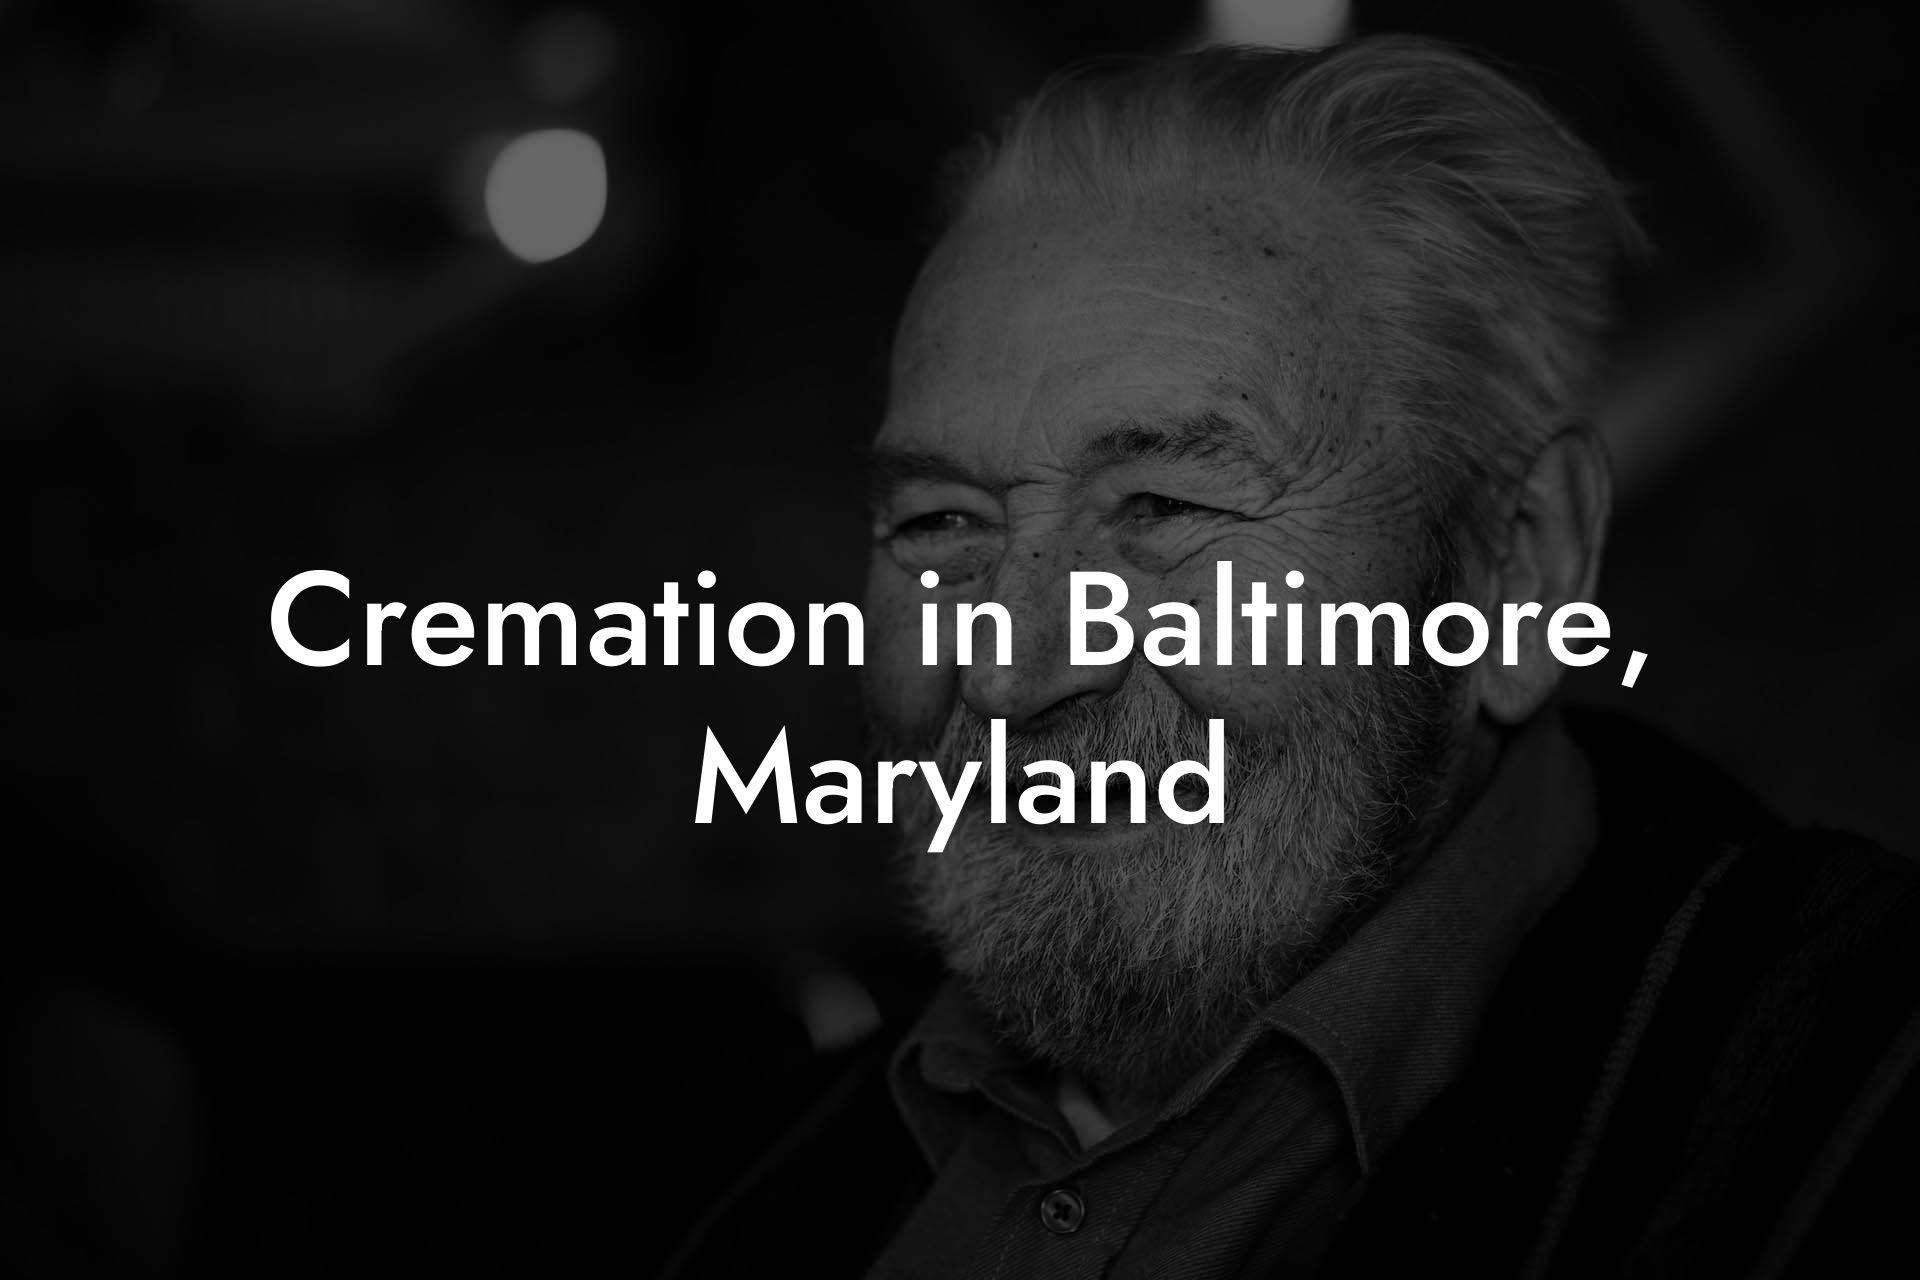 Cremation in Baltimore, Maryland